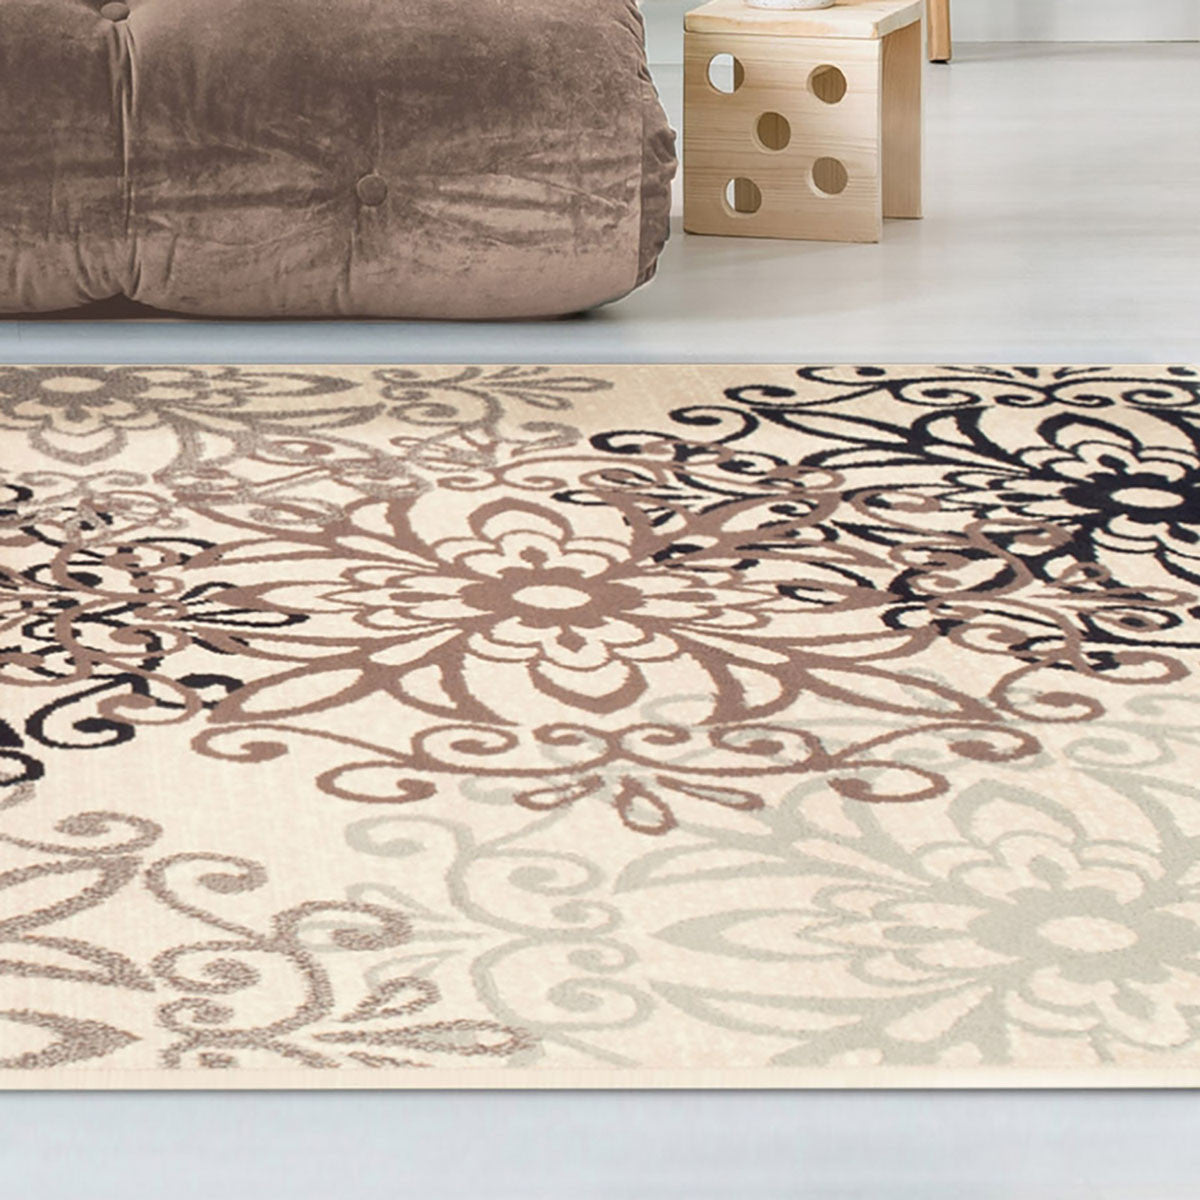 7' X 9' Tan Gray And Black Floral Medallion Stain Resistant Area Rug